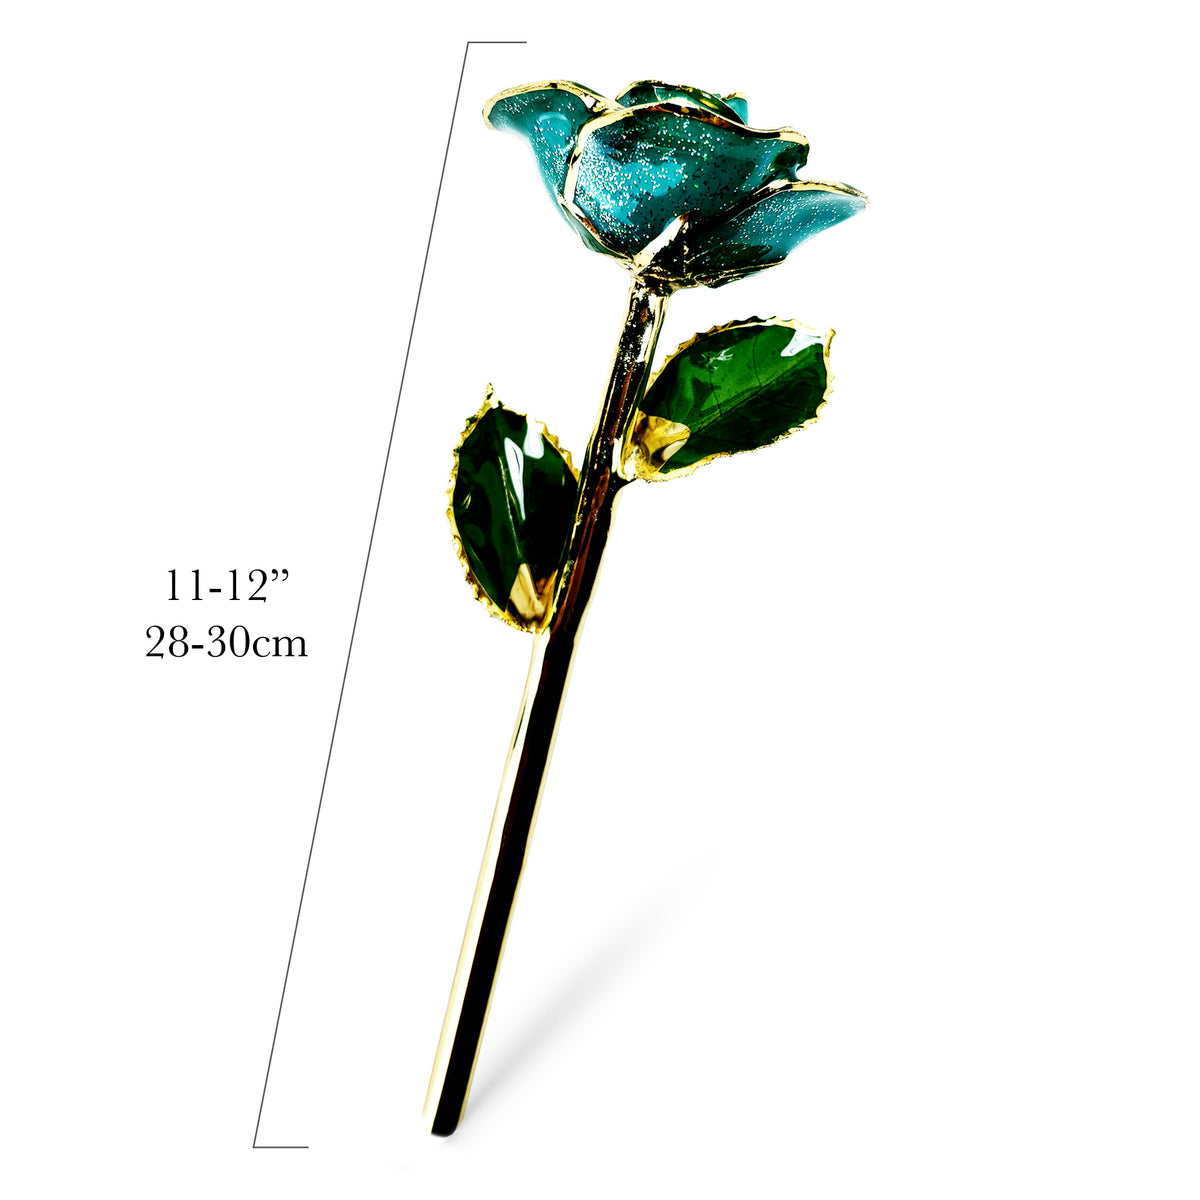 24K Gold Trimmed Forever Rose with Teal Petals with sparkles suspended in the finish. View of Stem, Leaves, and Rose Petals and Showing Detail of Gold Trim